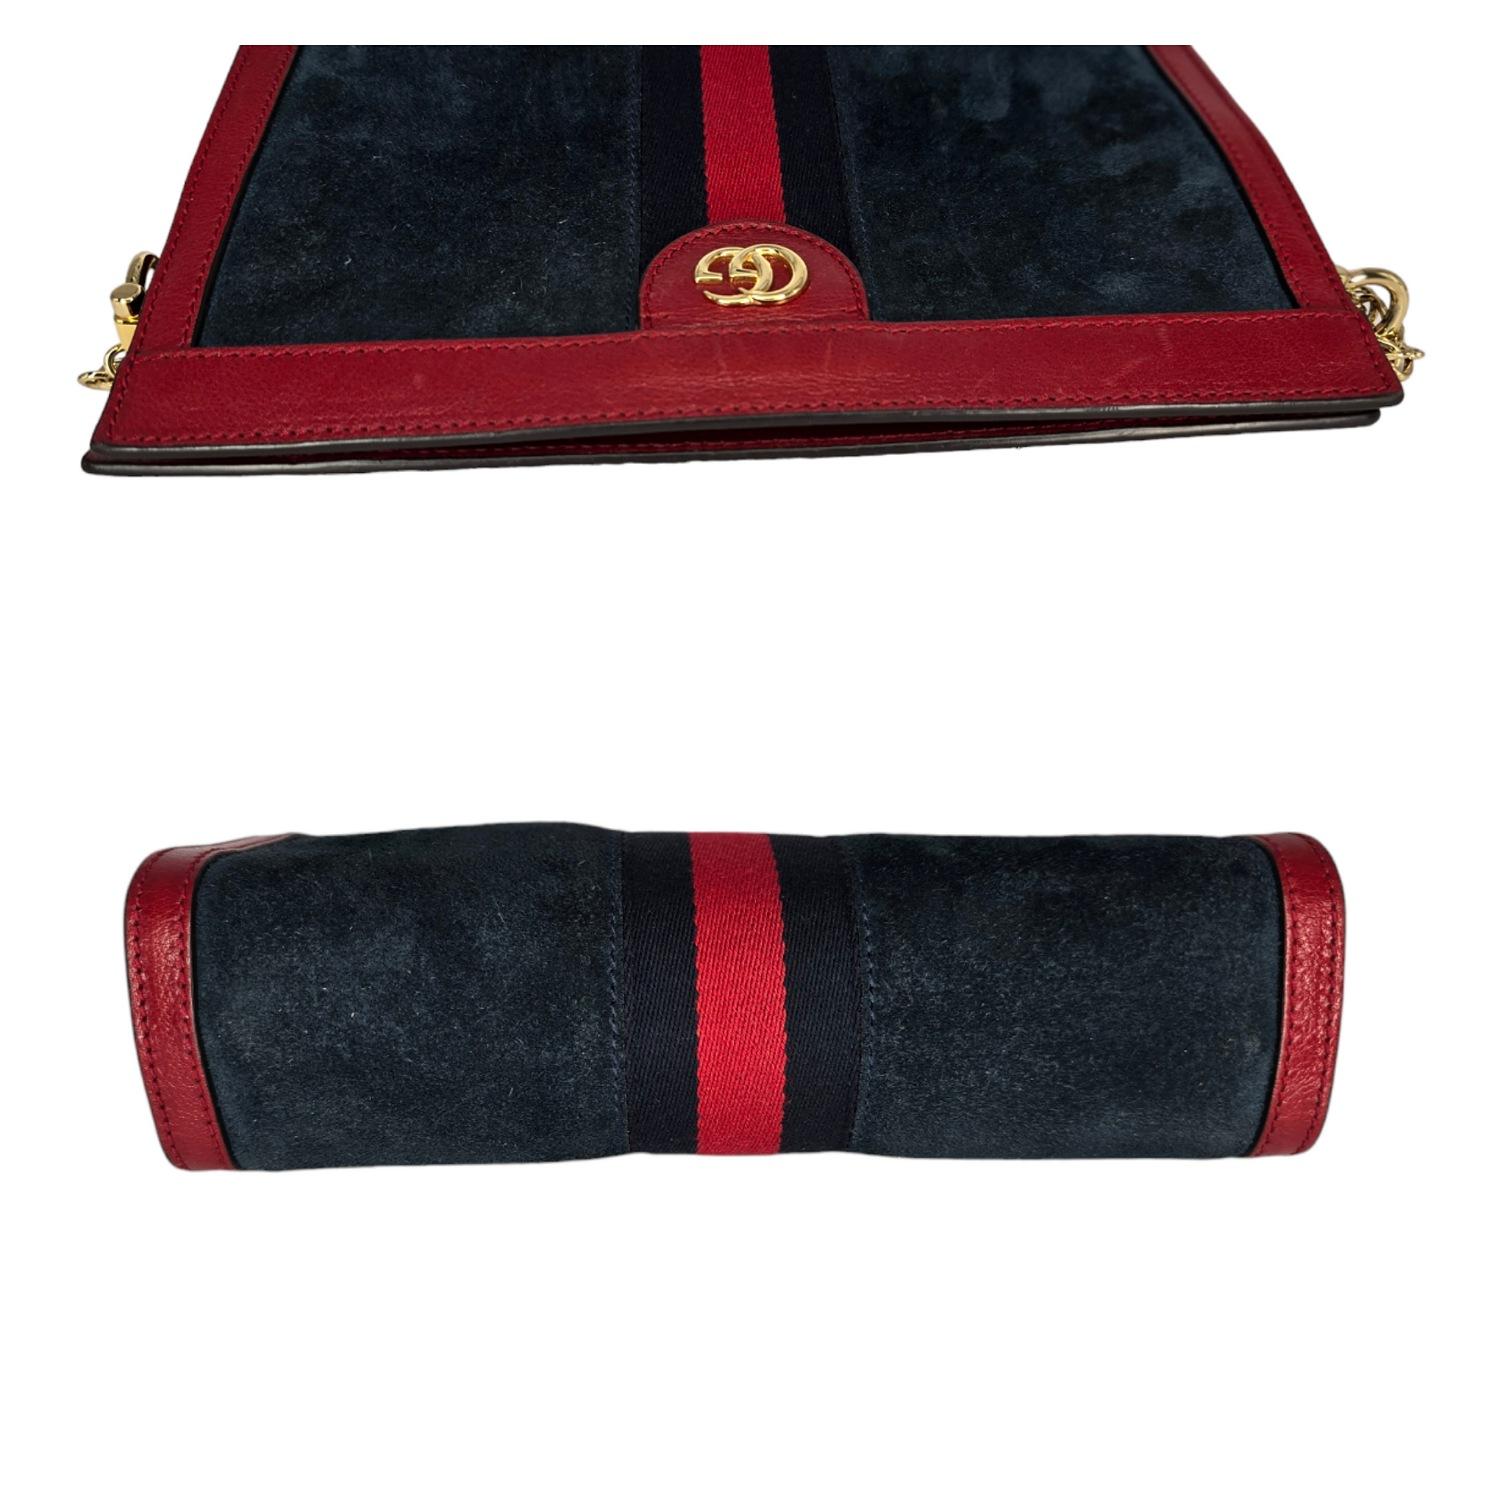 Gucci Ophidia Small Suede Leather Chain Shoulder Bag For Sale 2